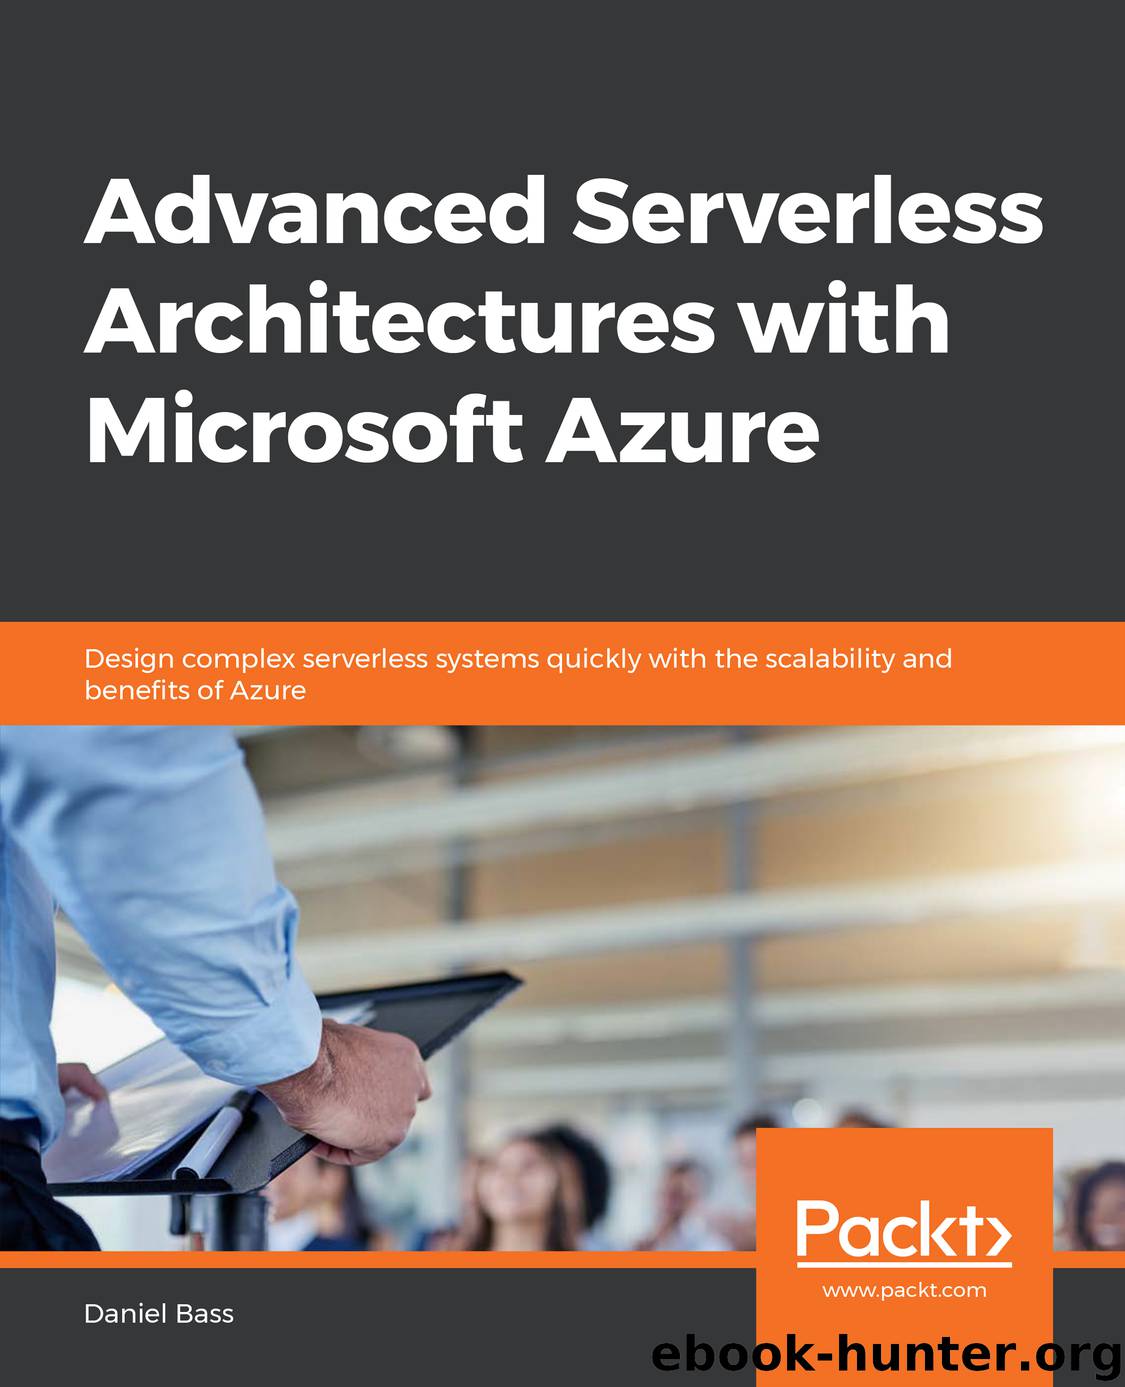 Advanced Serverless Architectures with Microsoft Azure by Daniel Bass